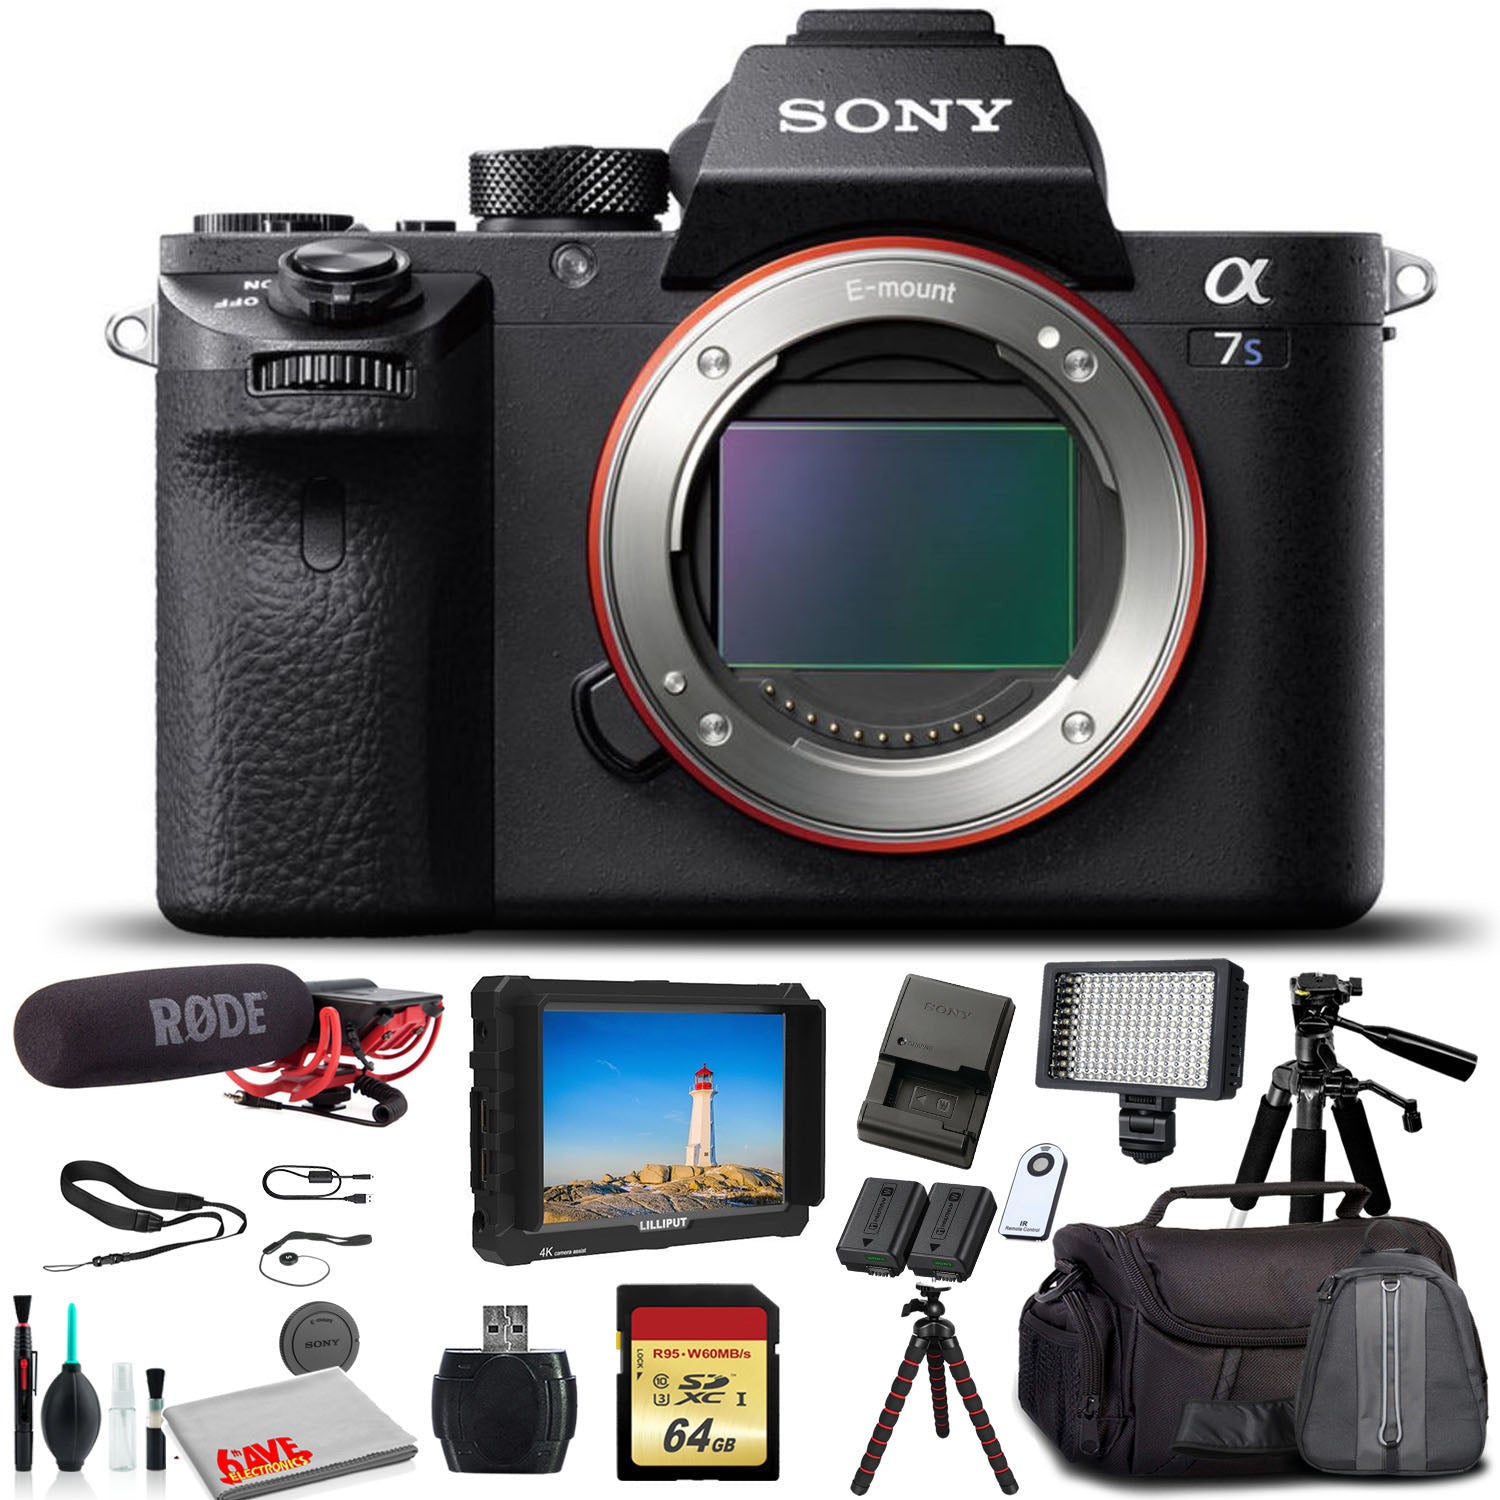 Sony Alpha a7S II Mirrorless Camera ILCE7SM2/B With Soft Bag, Tripod, Additional Battery, Rode Mic, LED Light, 64GB Memory Card, Sling Soft Bag, Card Reader , Plus Essential Accessories